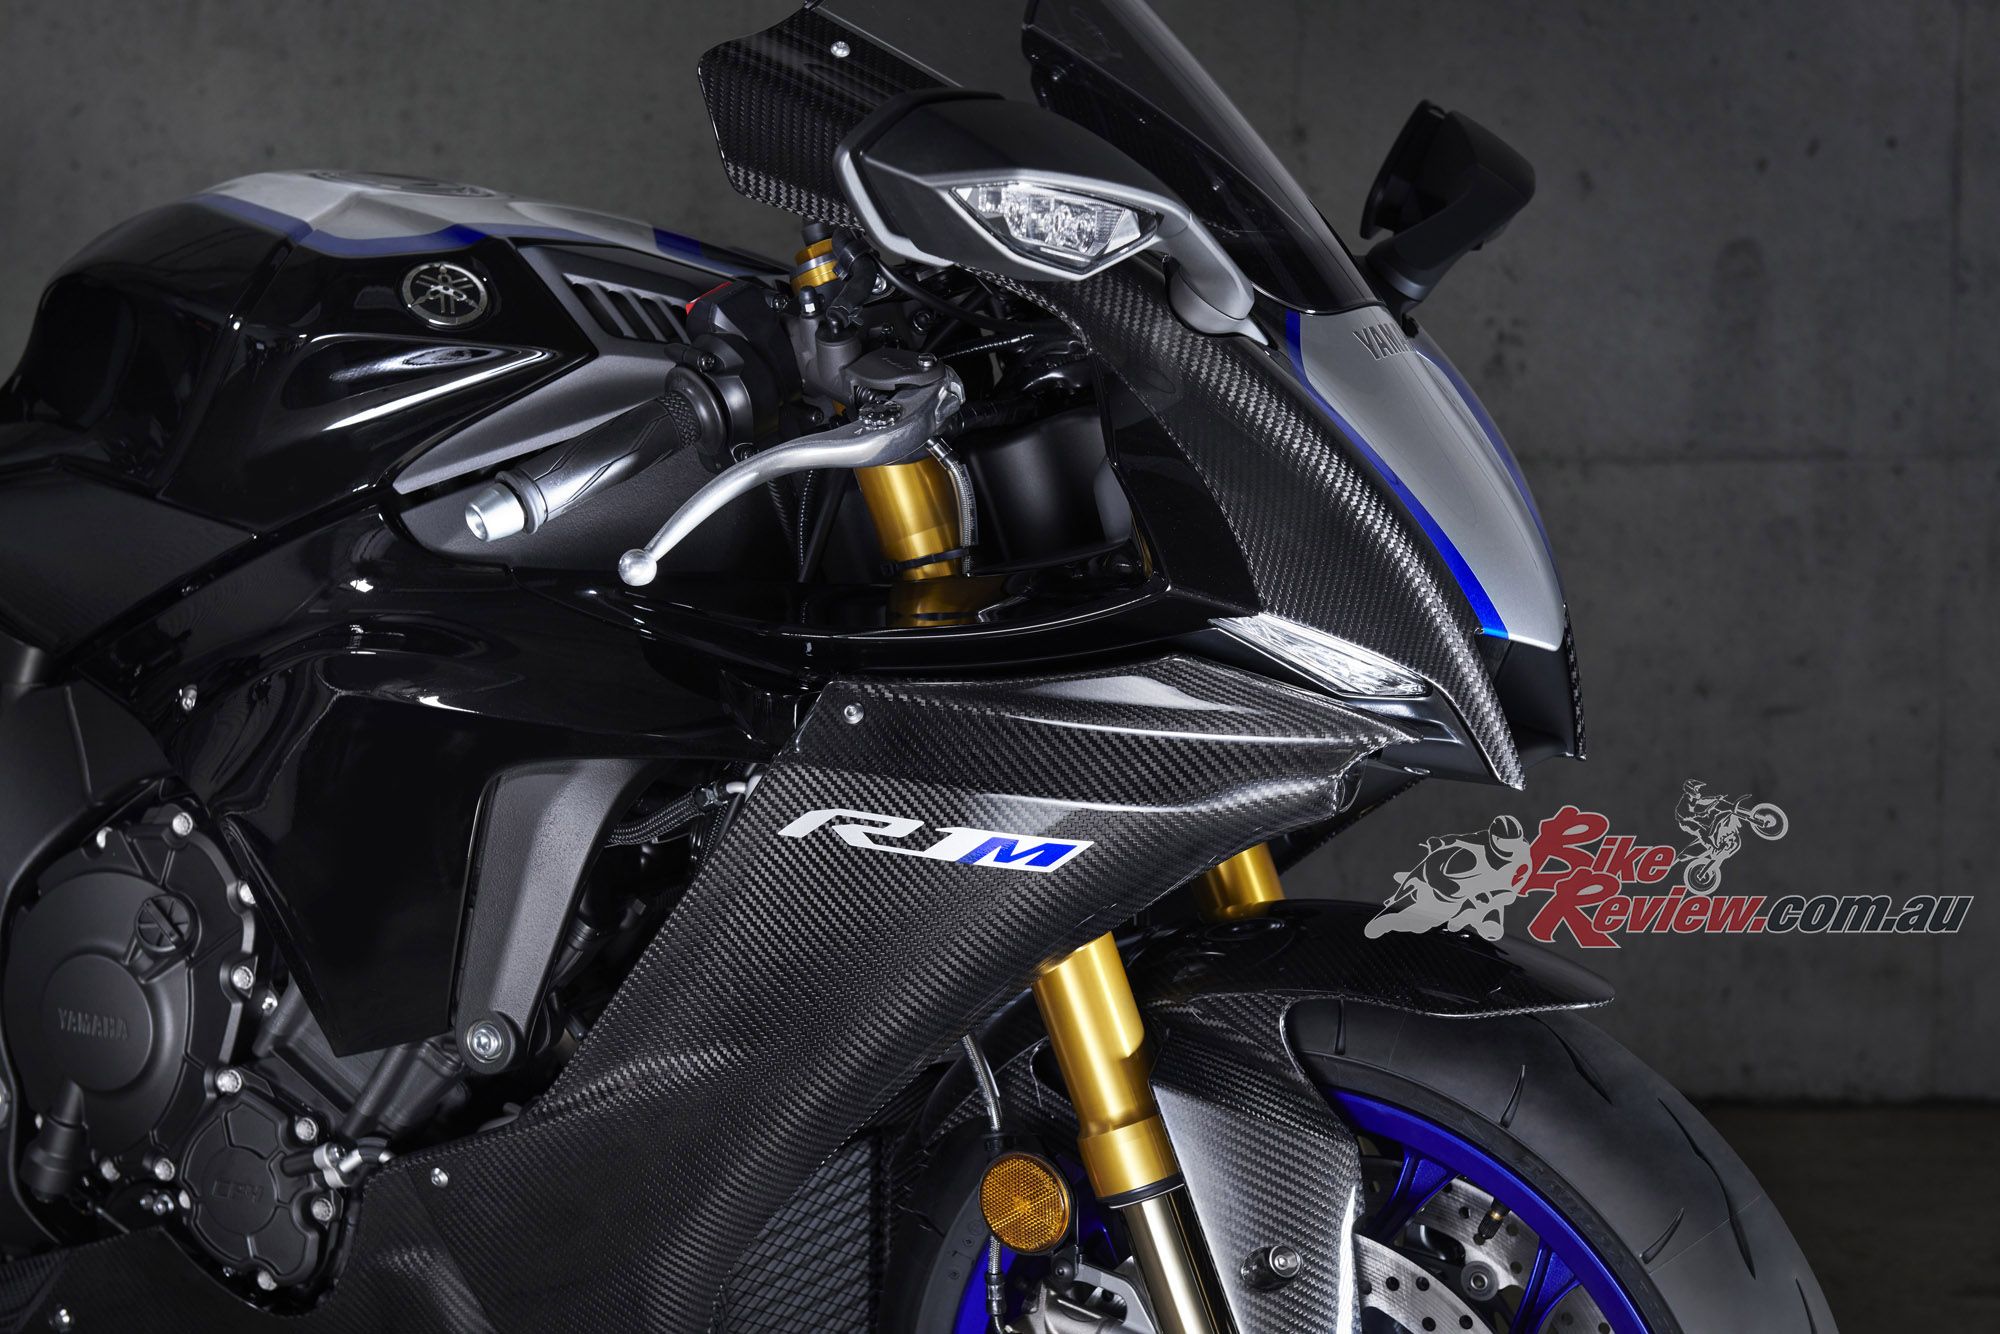 Preview: 2020 Yamaha YZF R1 Full Details, Gallery & Video